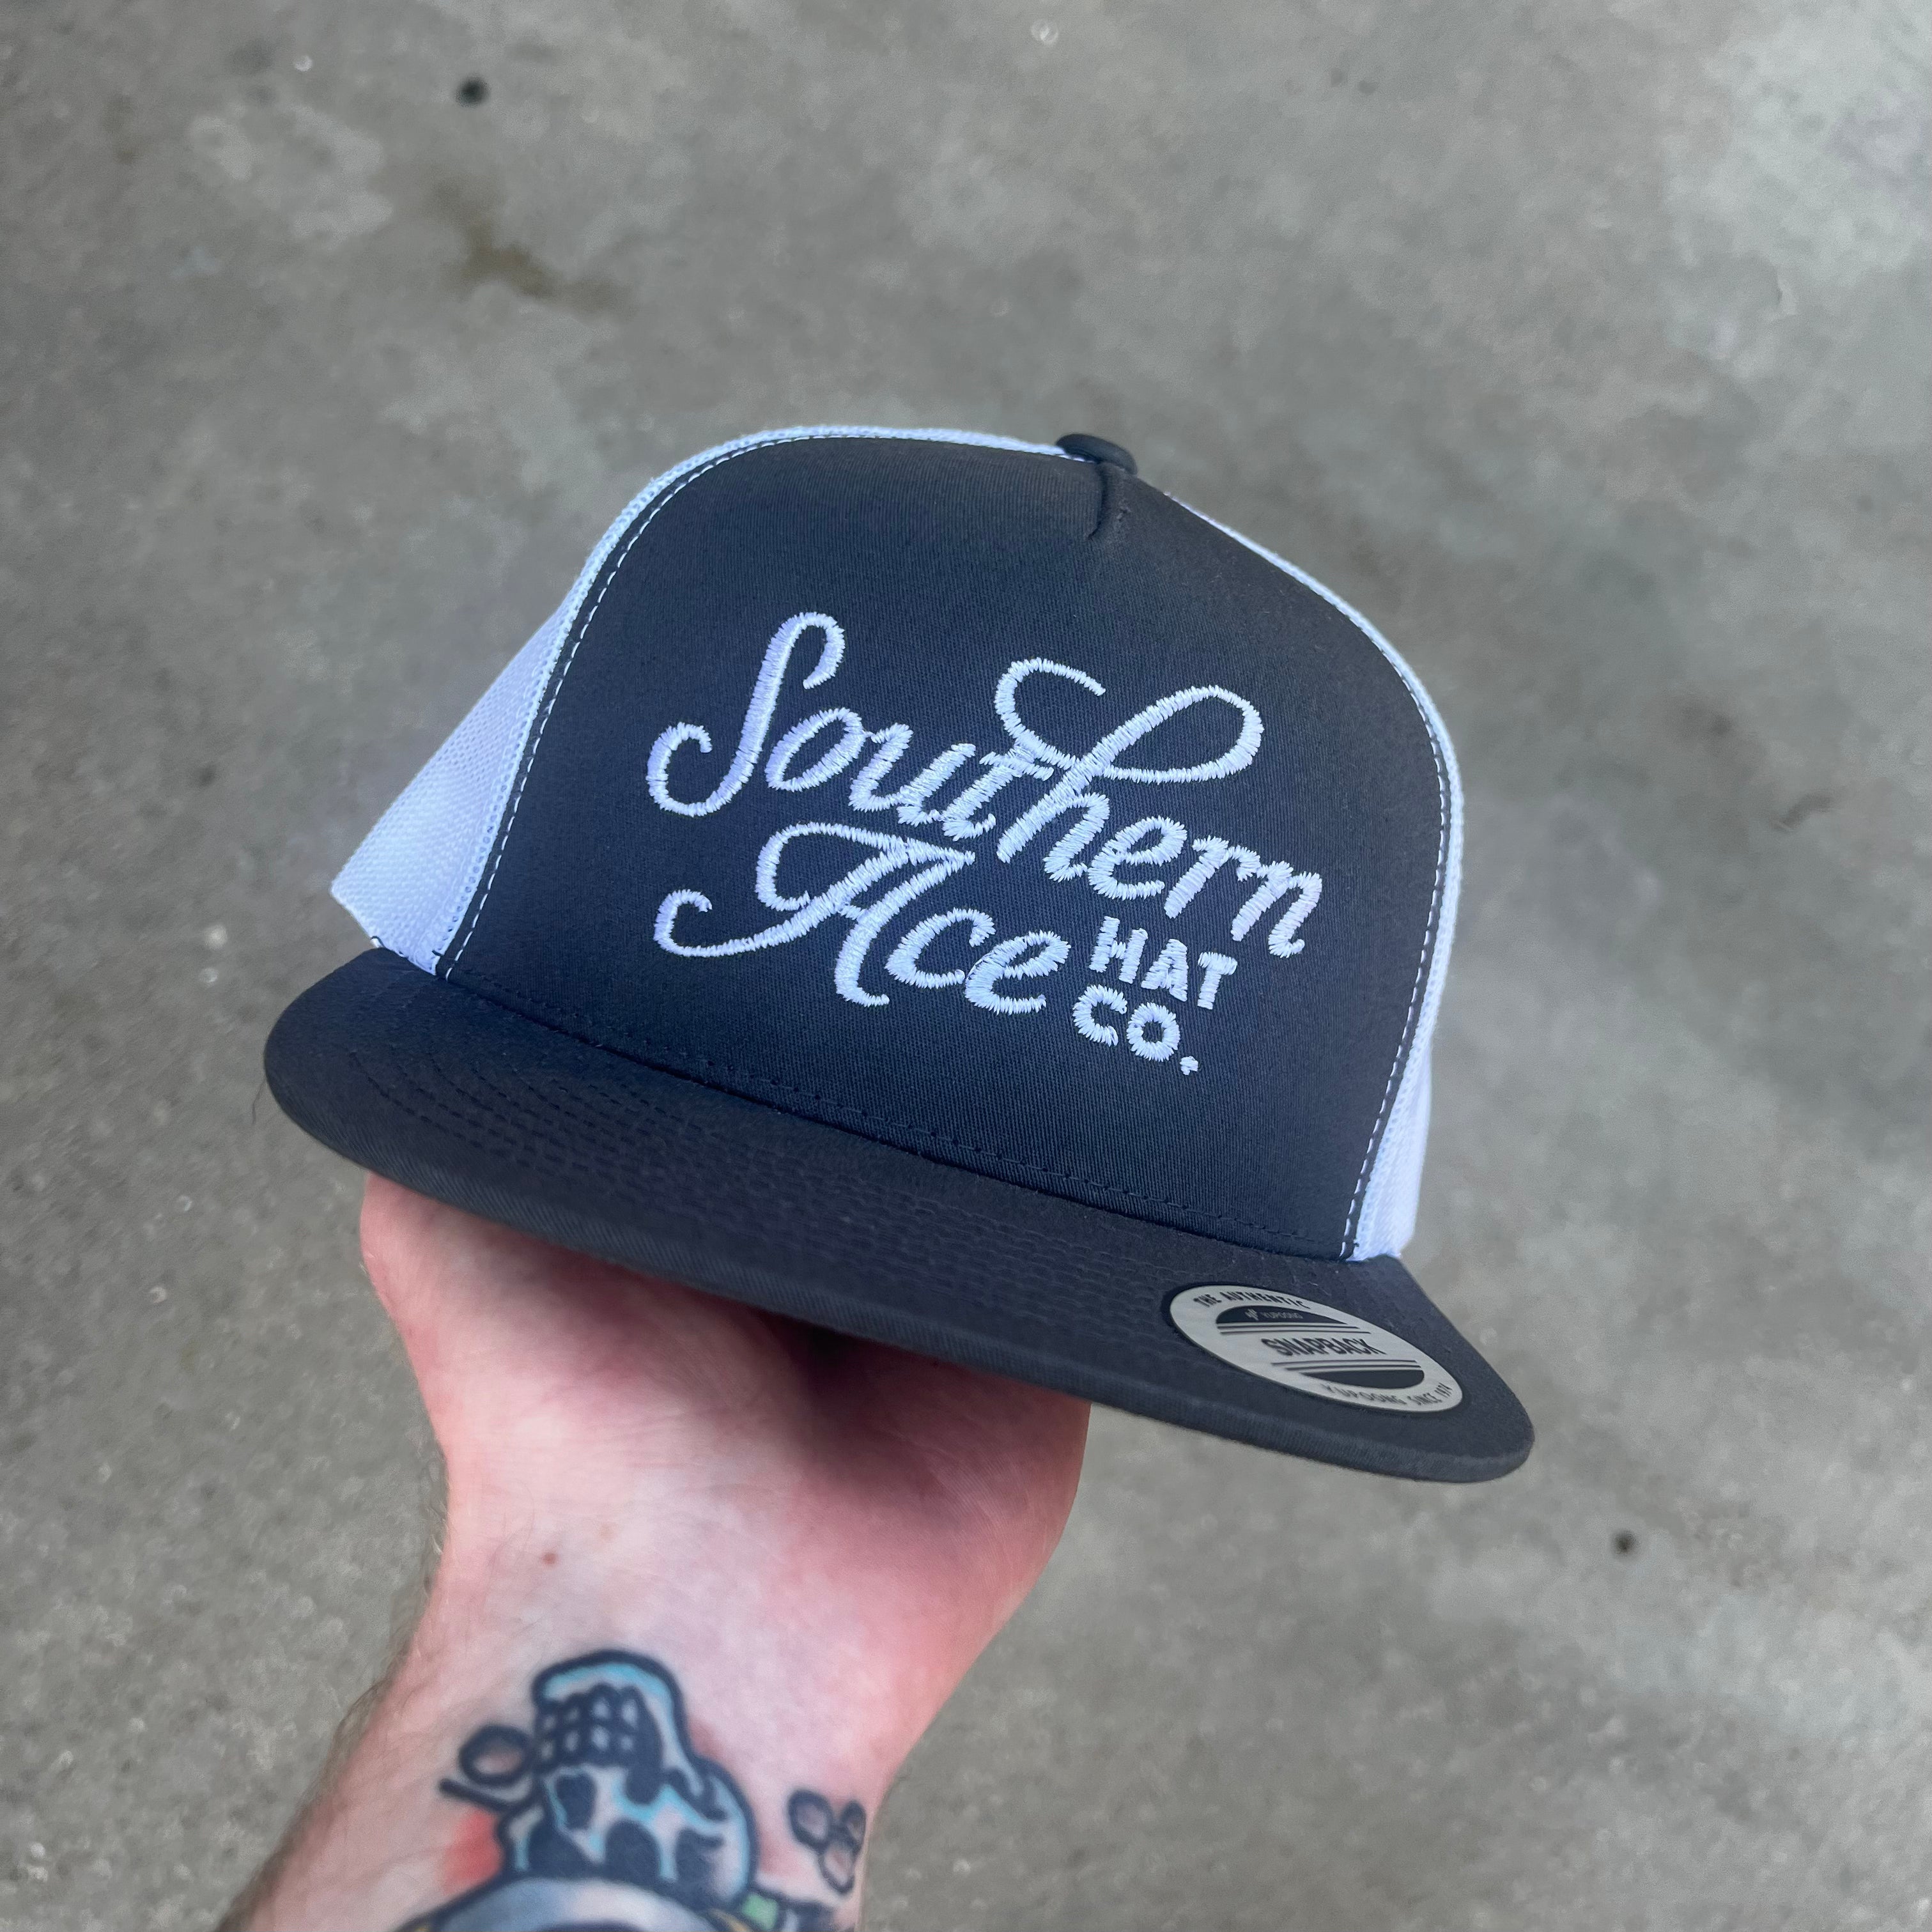 Southern Charm Hat Co.